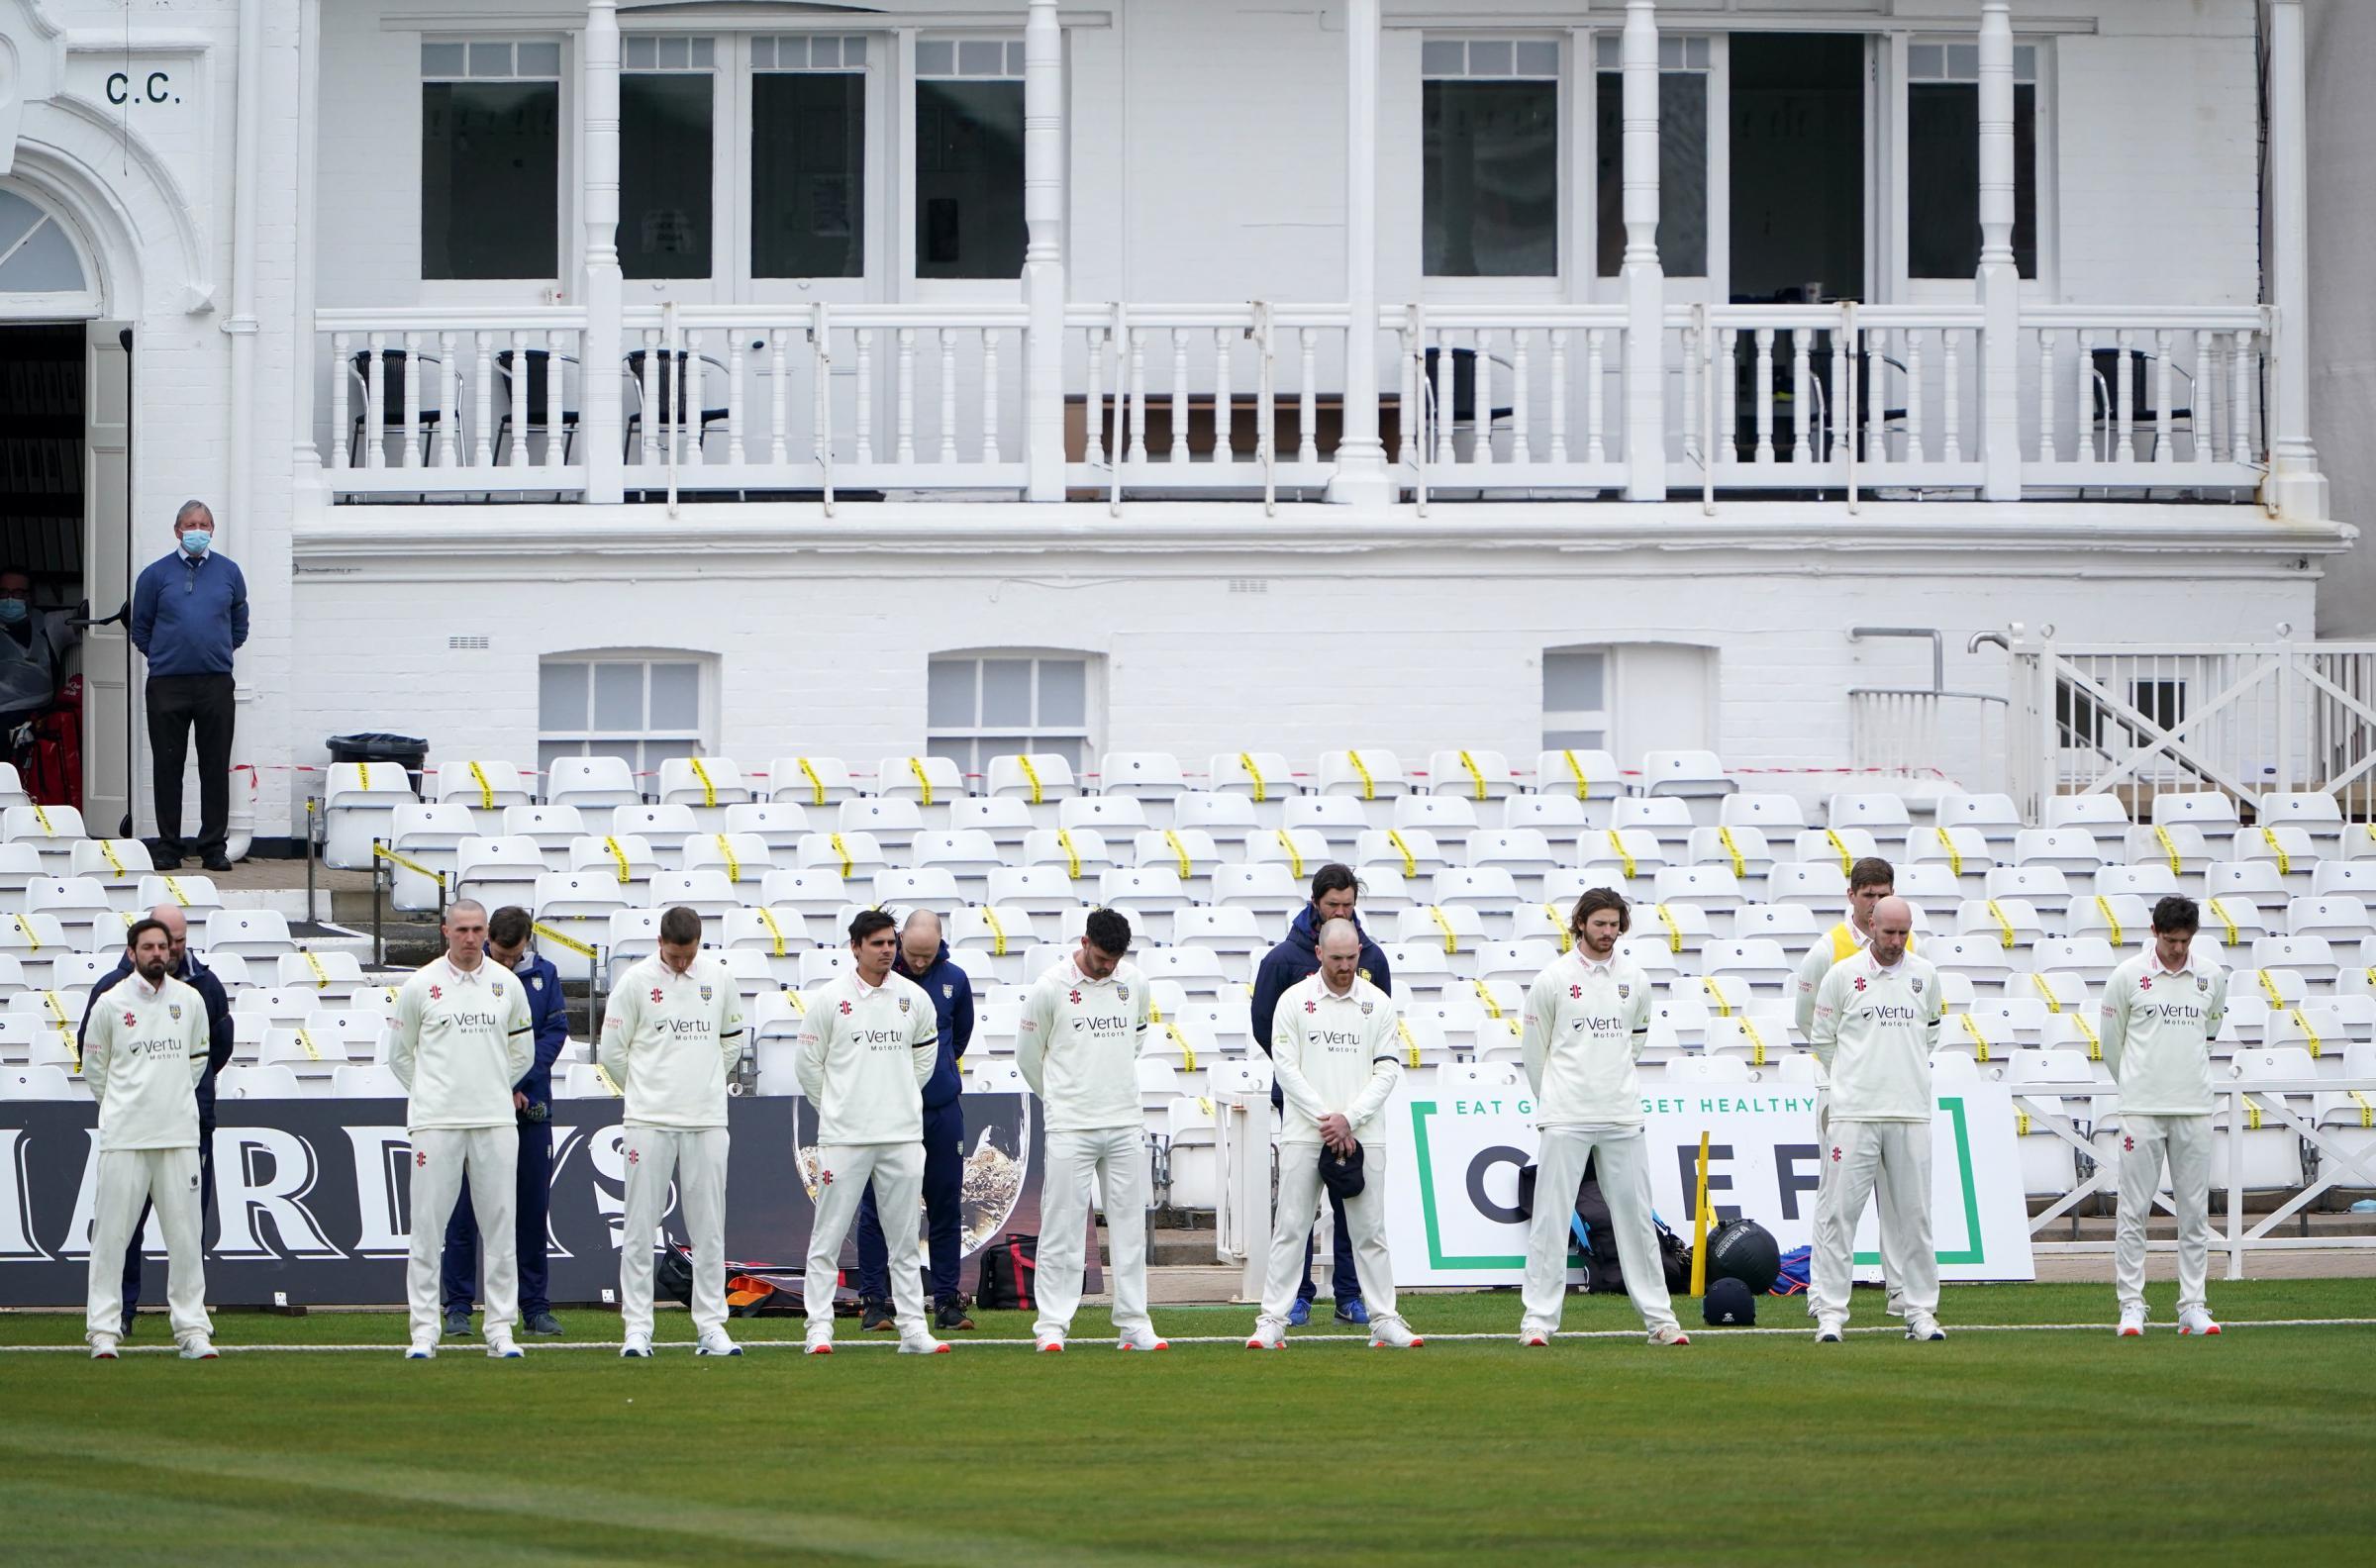 Durham CCC players stand for a minutes silence at Trent Bridge in Nottingham, after the announcement of the death of the Duke of Edinburgh. Picture date: Friday April 9, 2021. PA Photo. See PA story CRICKET Nottinghamshire. Photo credit should read Zac